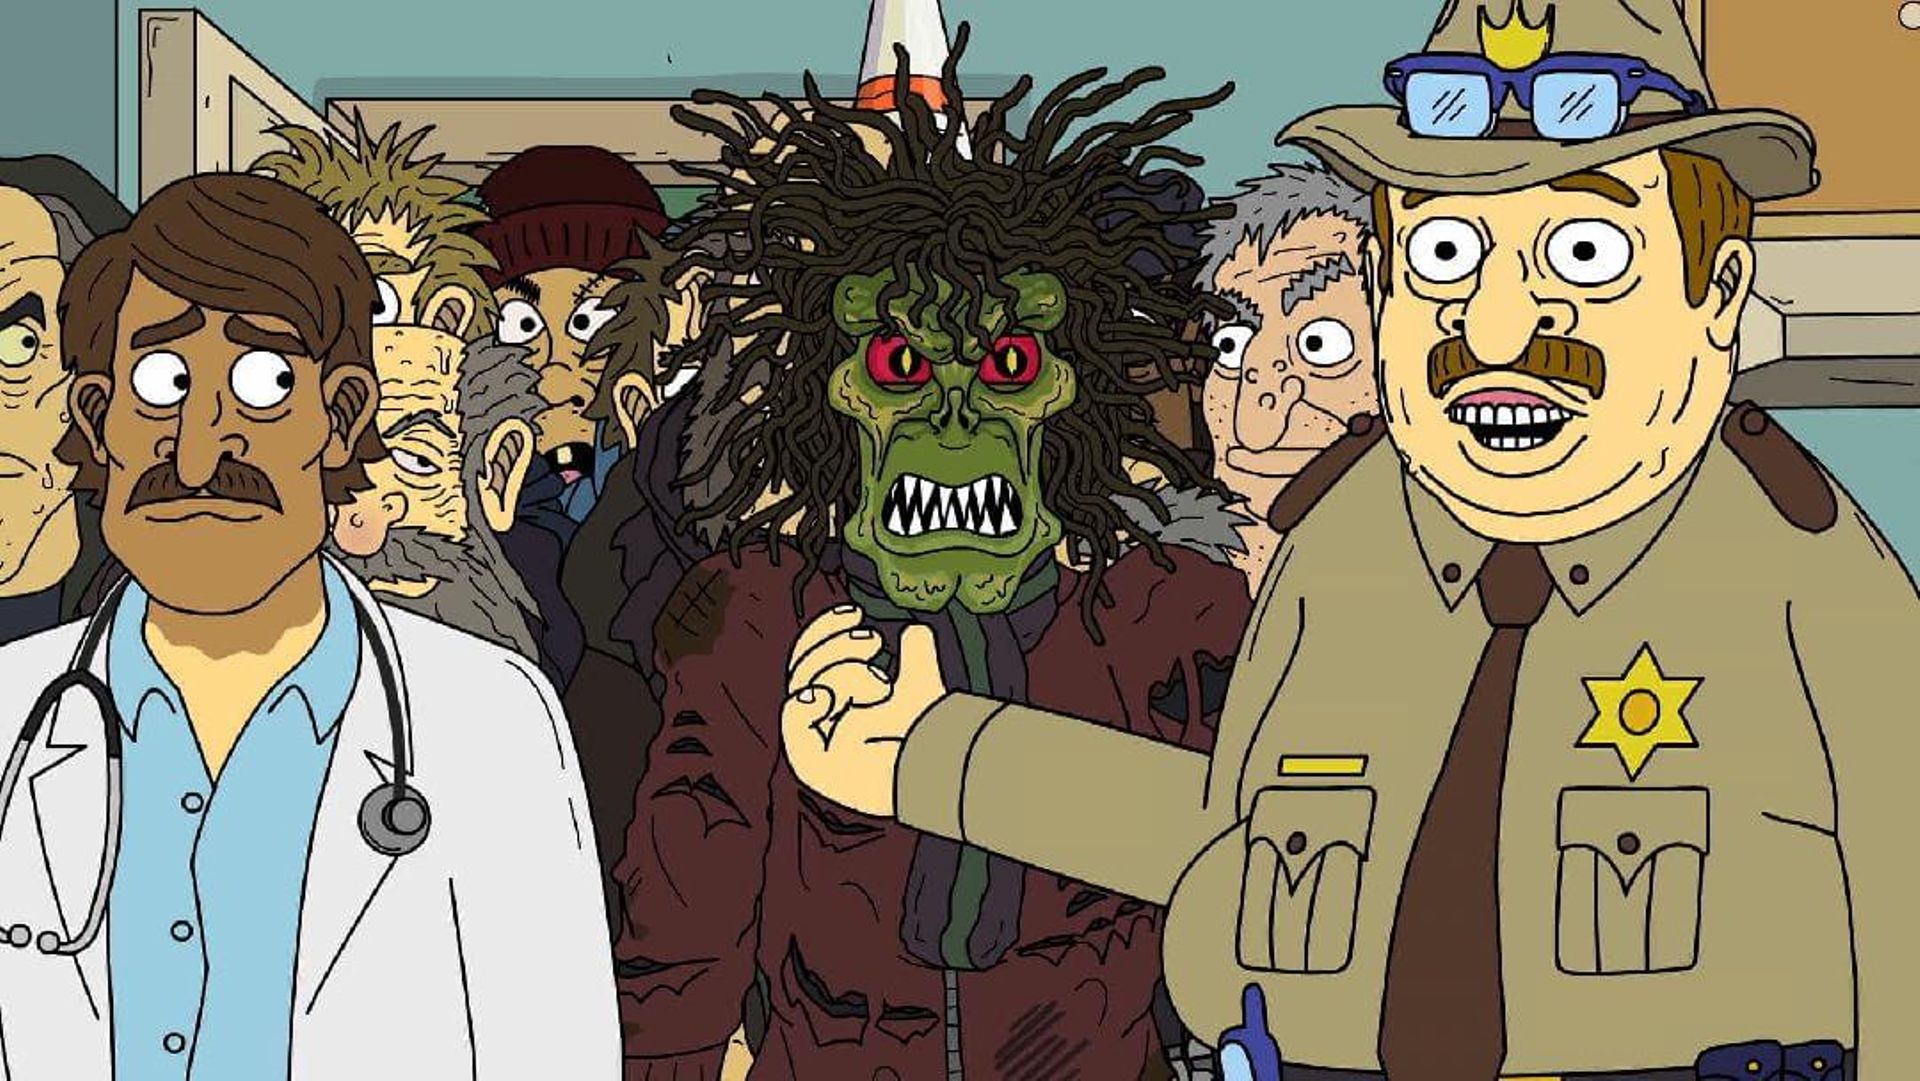 On March 24rd, Adult Swim series Mr. Pickles and spinoff Momma